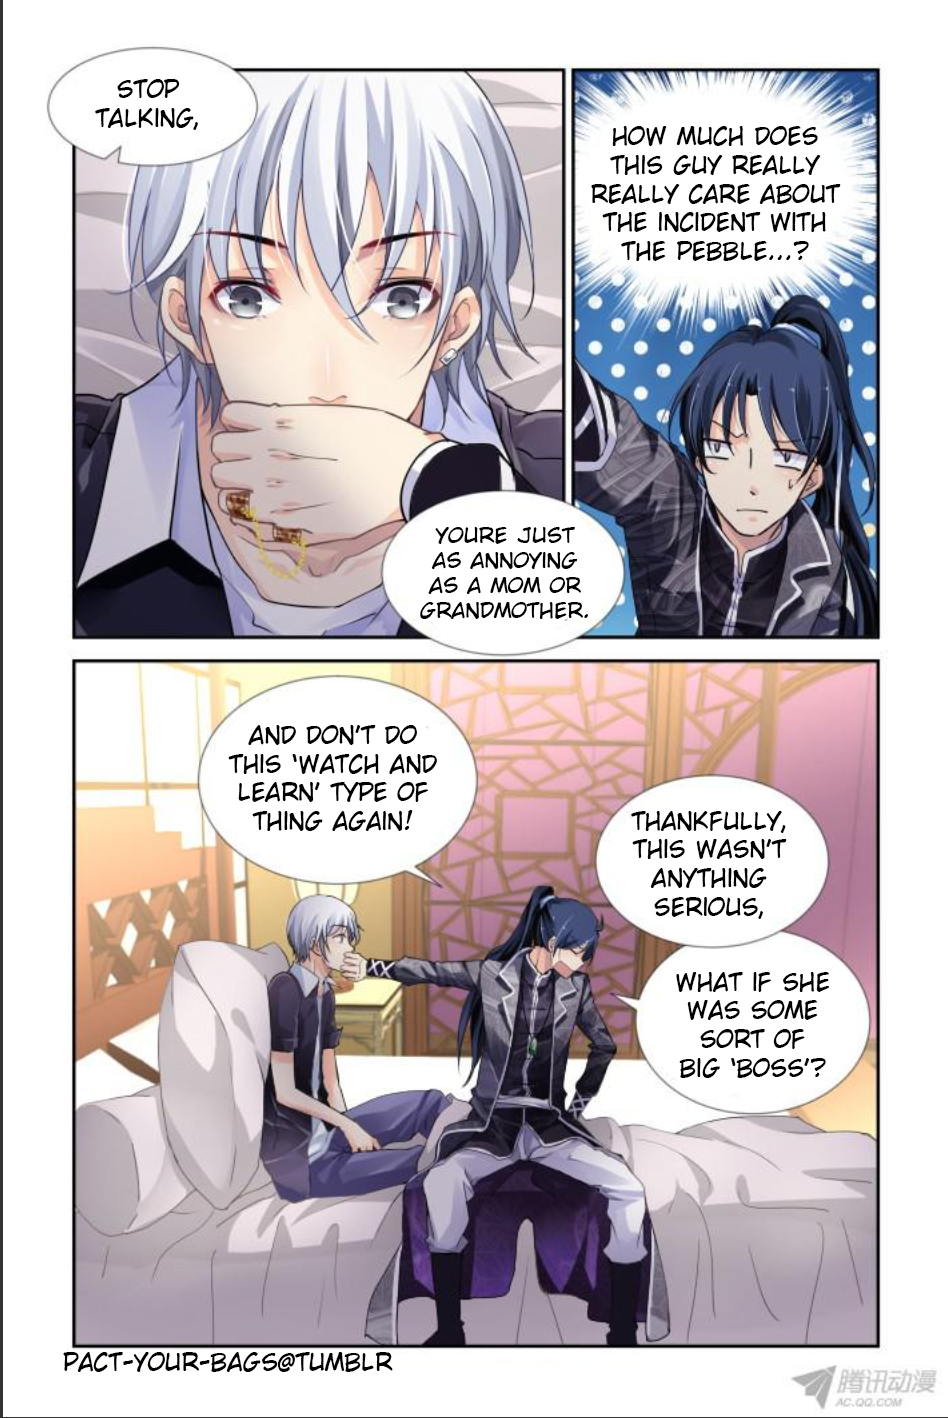 Soul Contract/ Spirit Pact BR/PT on X: Thred de perguntas frequentes sobre  Spiritpact! #SpiritPact #SoulContract #LingQi  / X